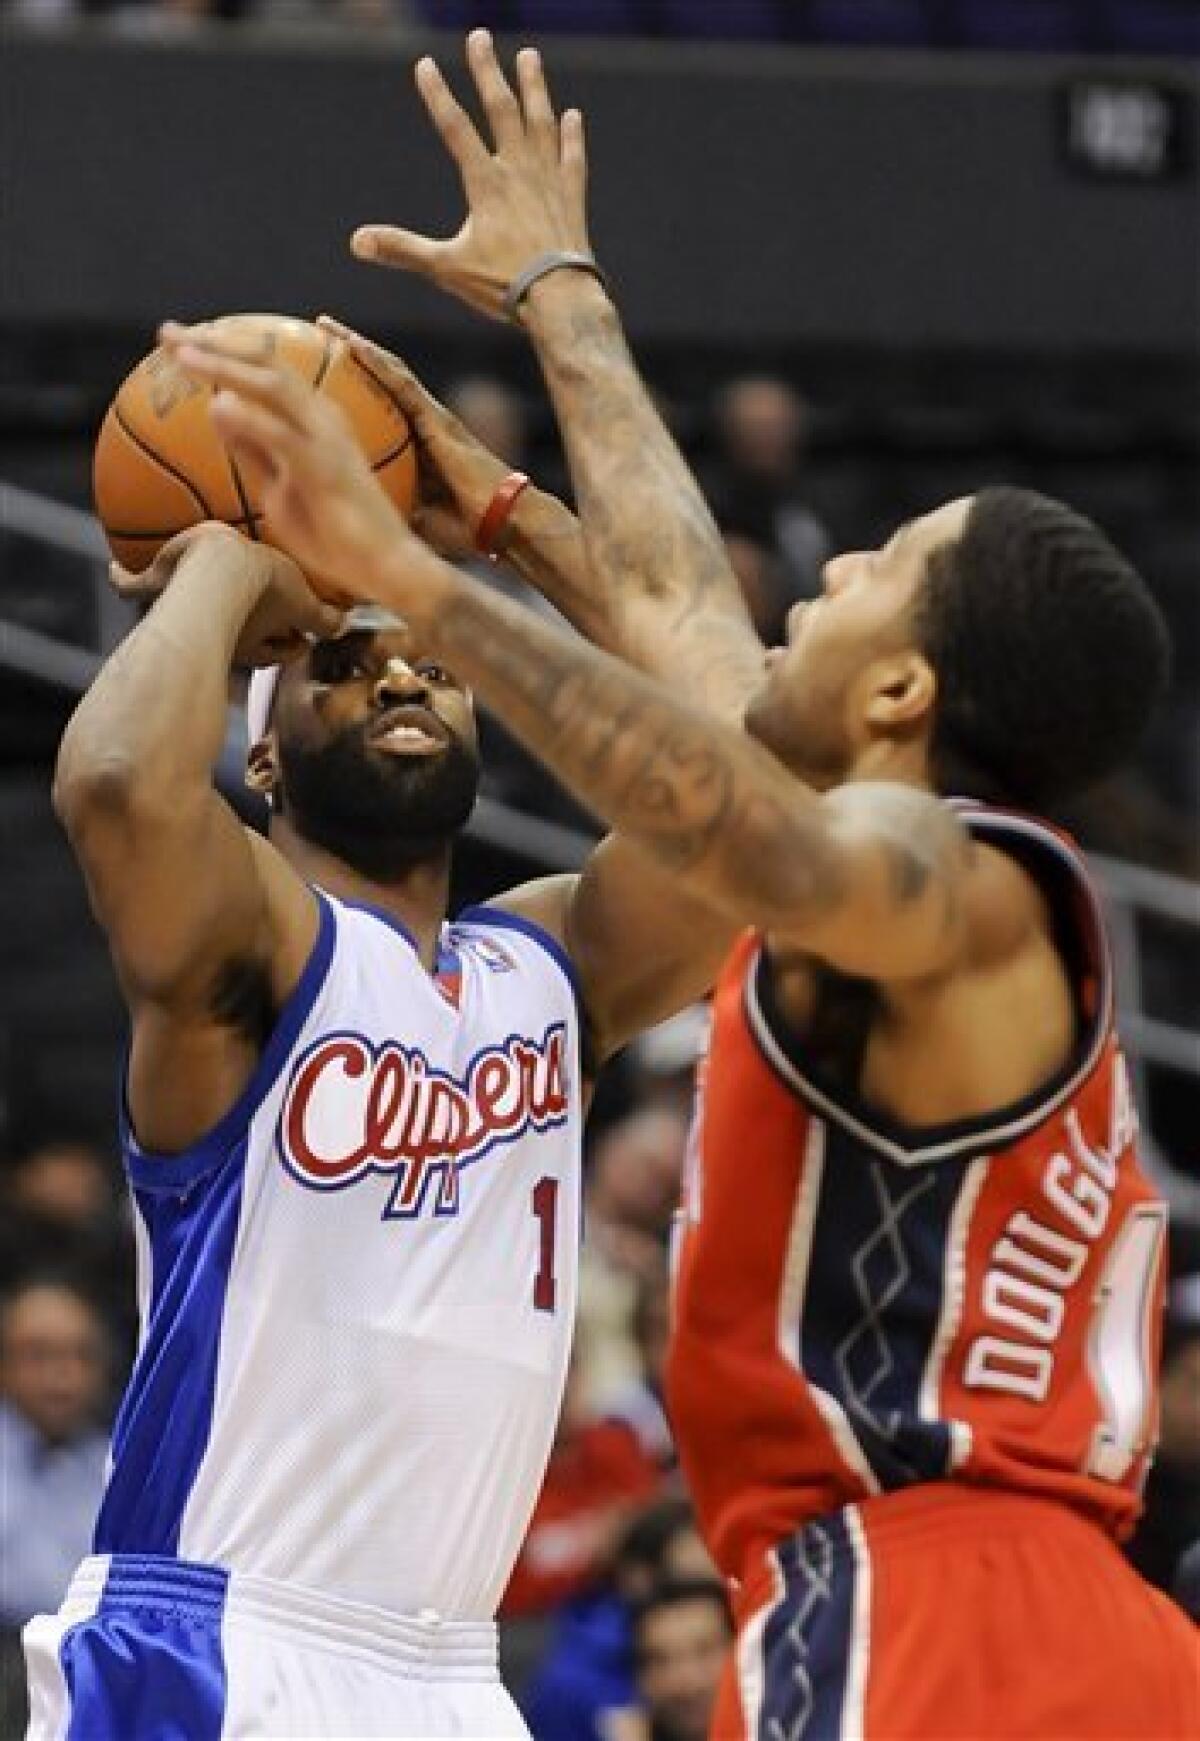 Kaman returns to lead Clippers over Nets 106-95 - The San Diego